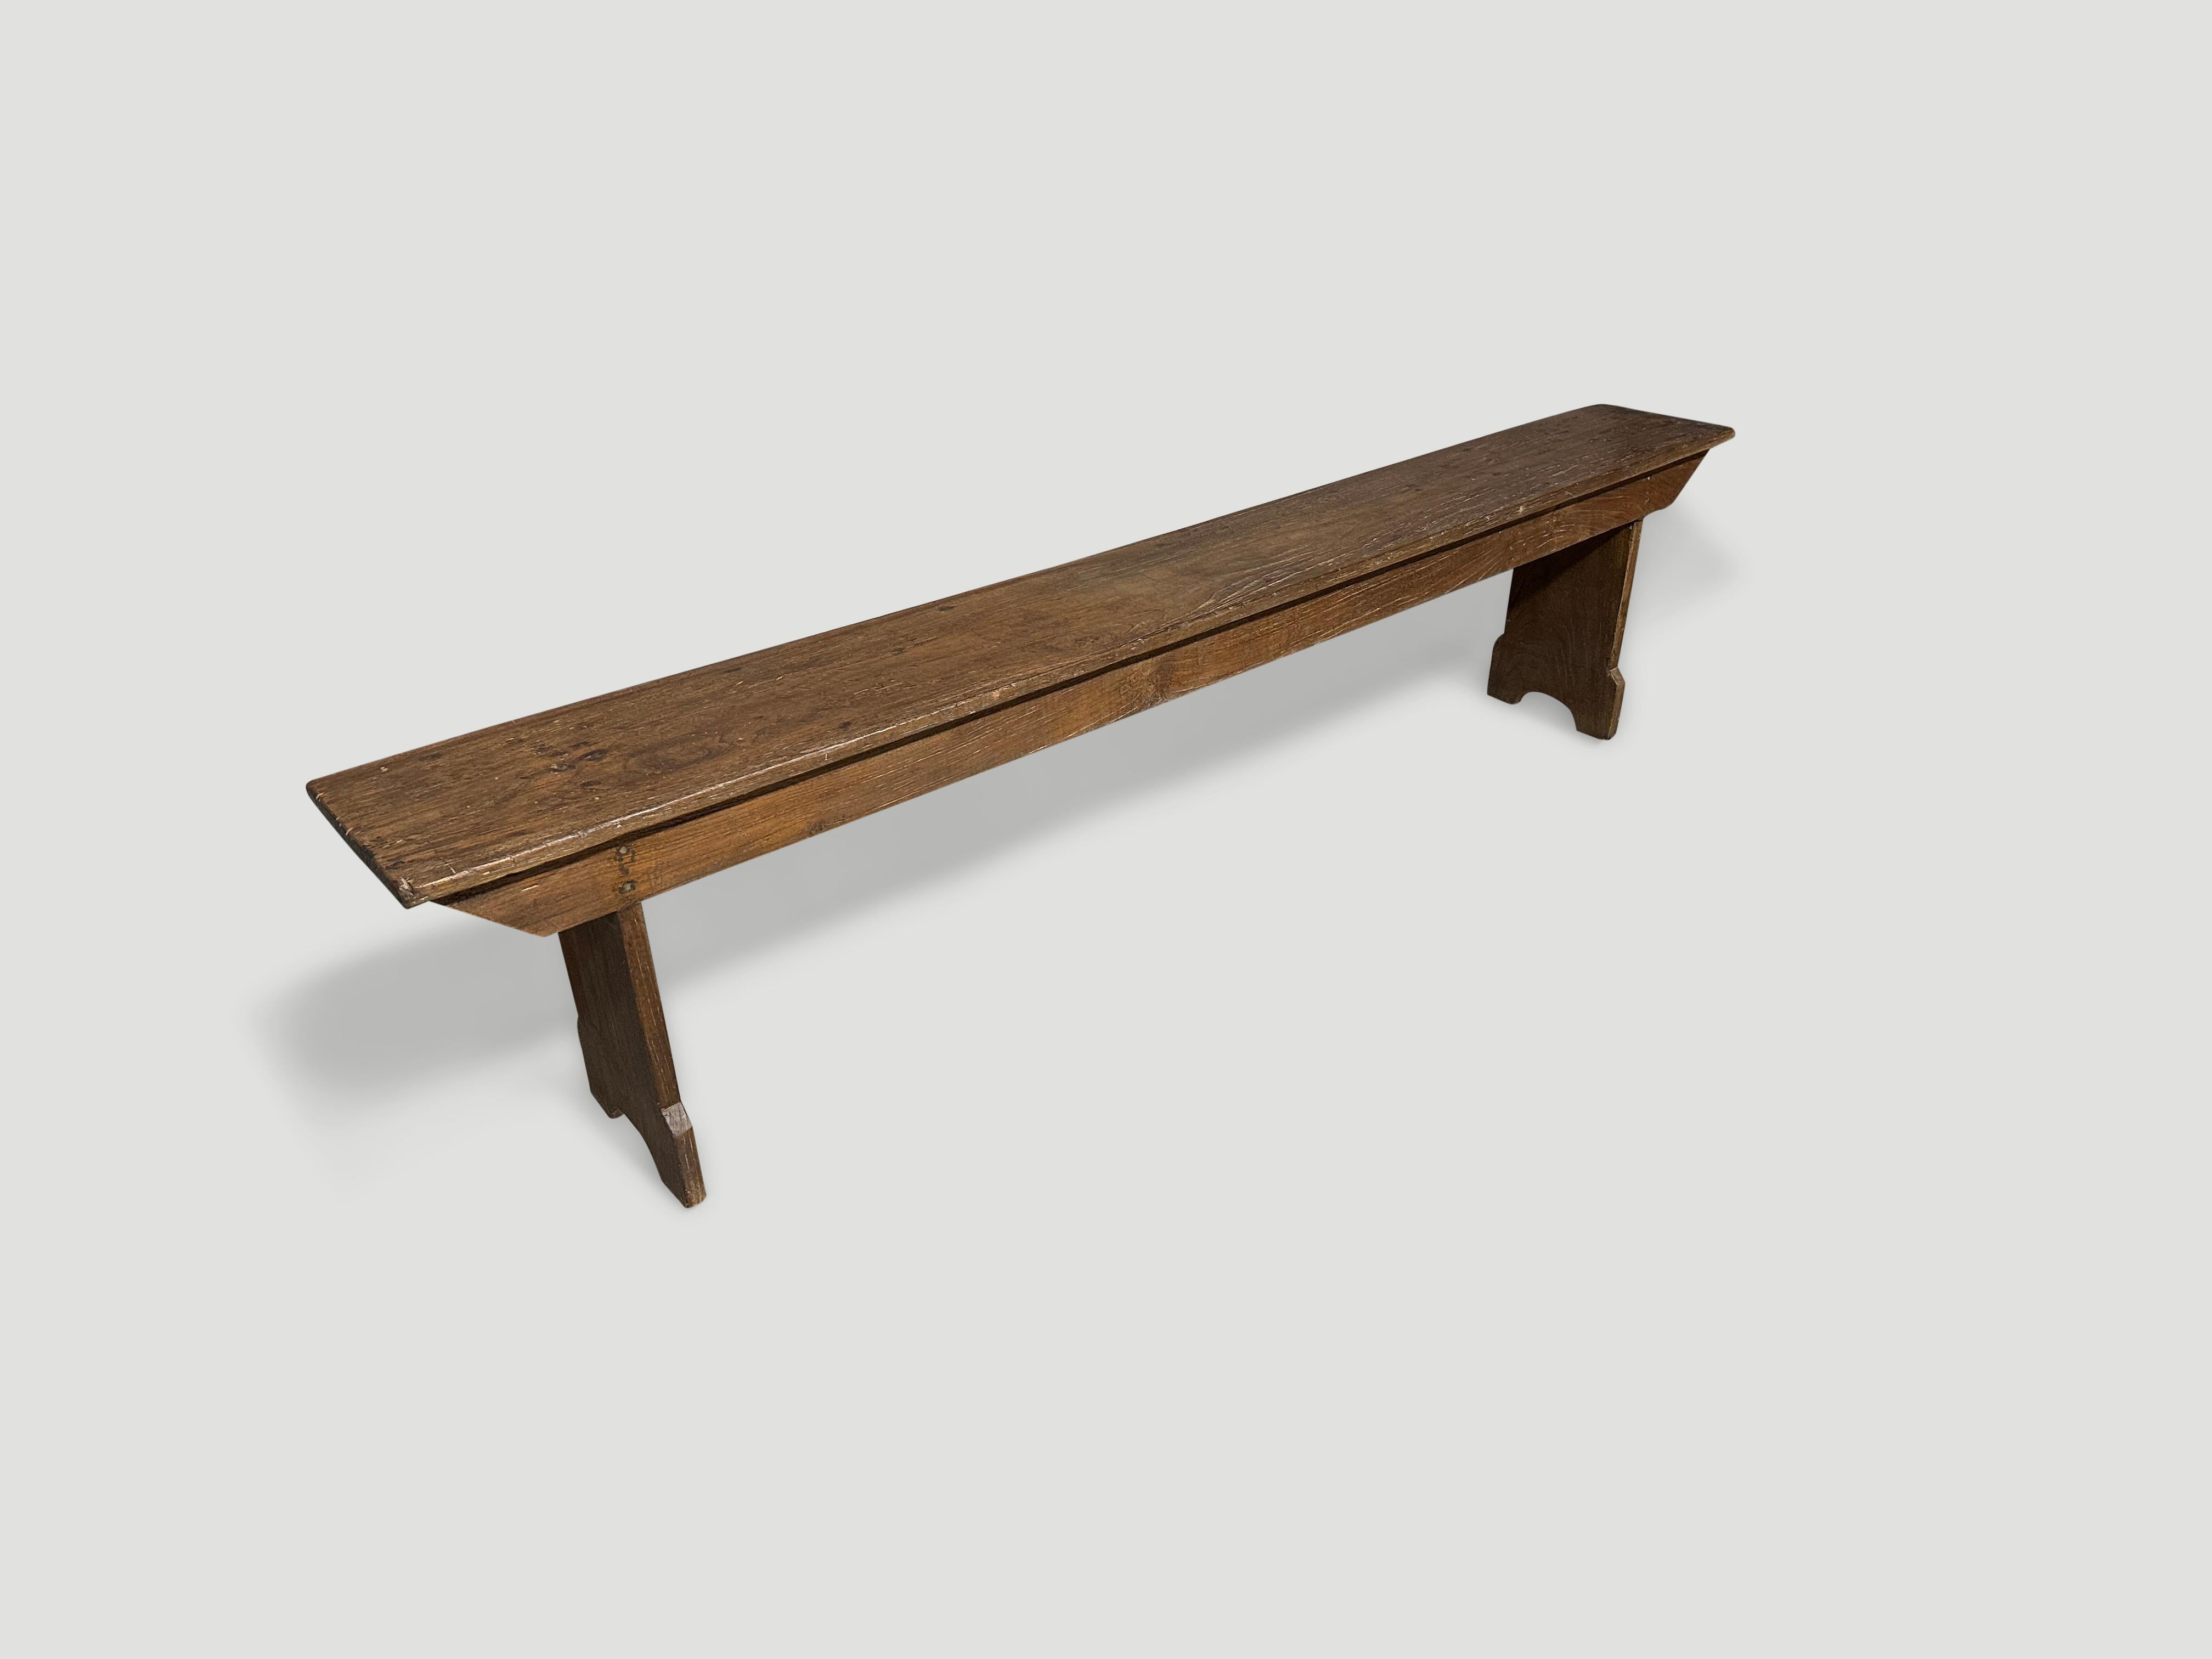 Antique bench hand made from a single top panel of teak wood with lovely patina. Finished in a natural oil revealing the beautiful wood grain. Circa 1950.

This bench was hand made in the spirit of Wabi-Sabi, a Japanese philosophy that beauty can be